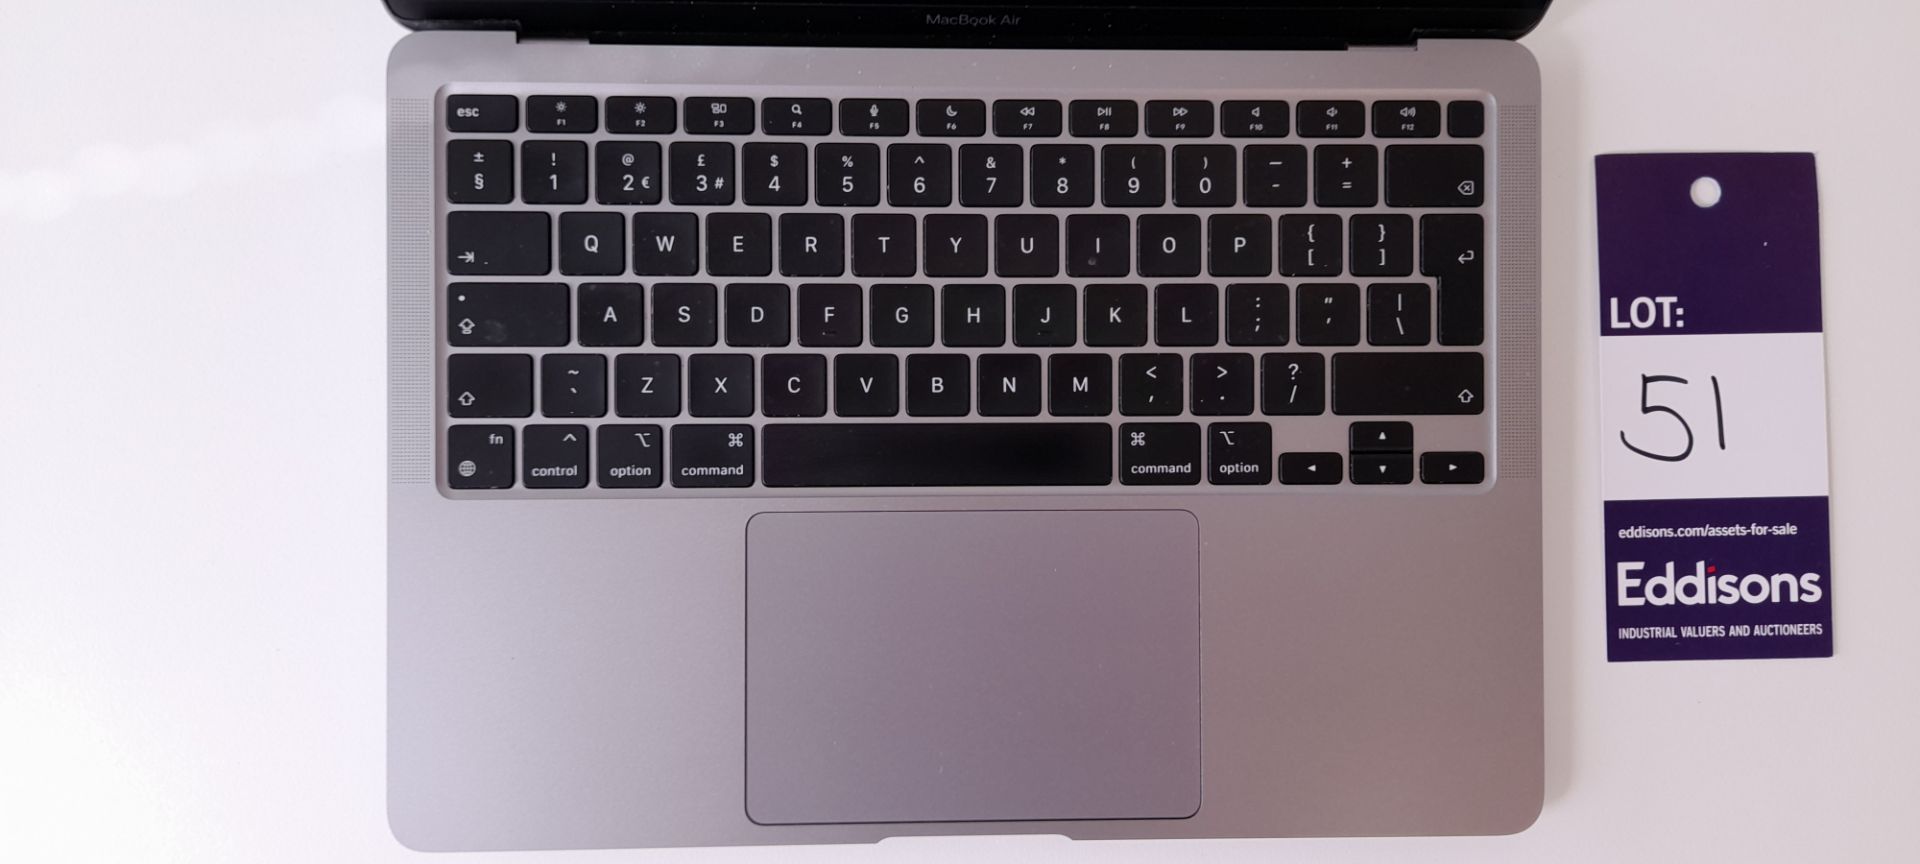 Apple MacBook Air Model A2337 EMC 3598. S/N C02FC92BQ6L4. Collection from Canary Wharf, London, E14 - Image 2 of 7